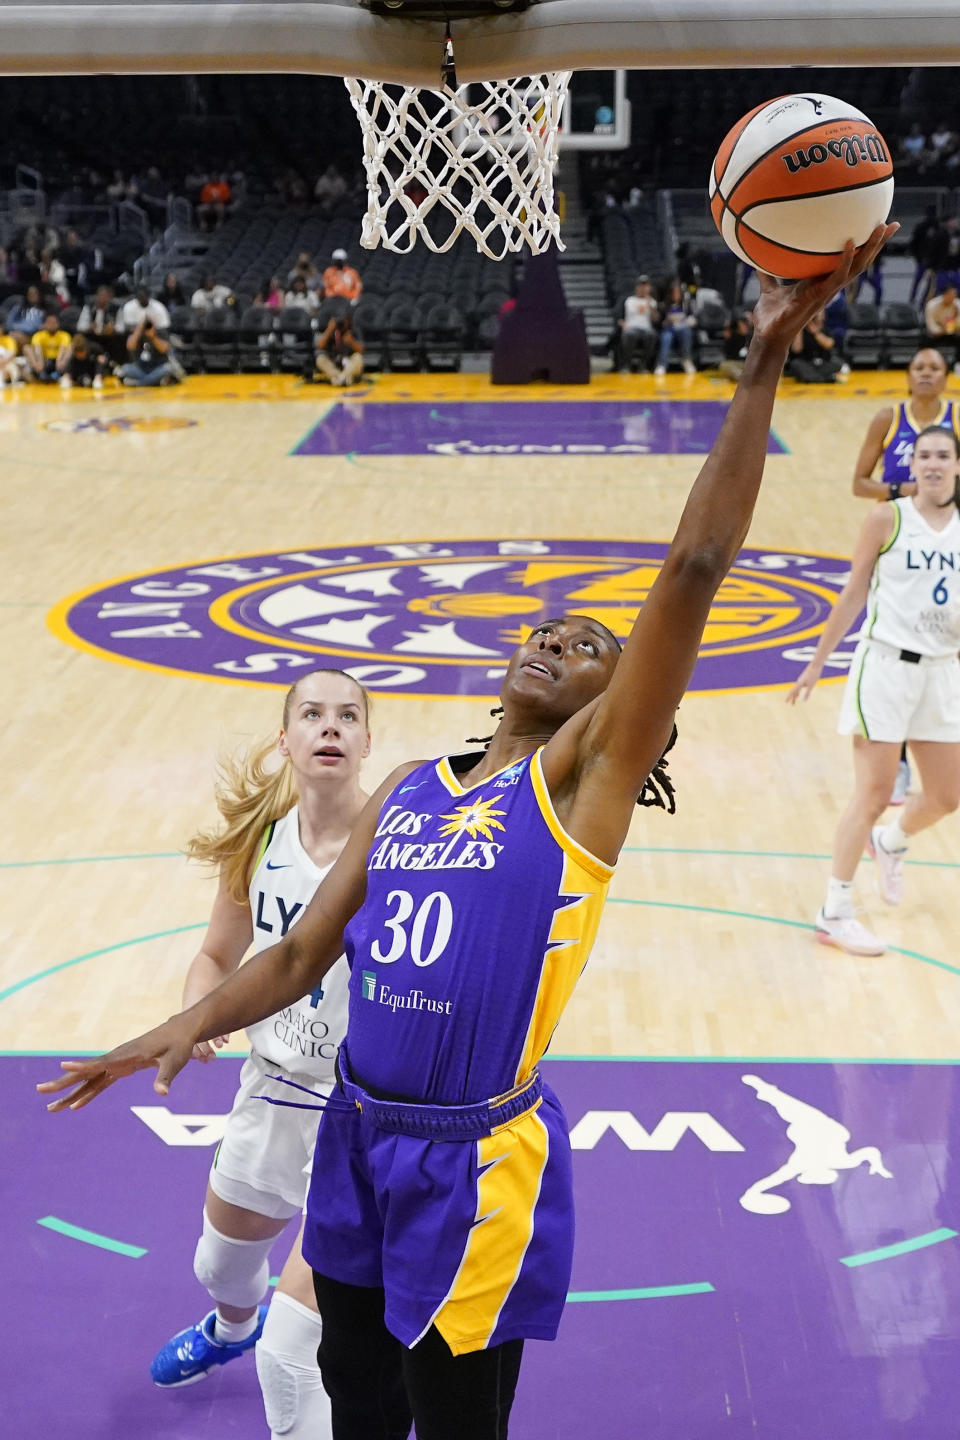 Los Angeles Sparks forward Nneka Ogwumike, right, shoots as Minnesota Lynx forward Dorka Juhasz defends during the first half of a WNBA basketball game Tuesday, June 20, 2023, in Los Angeles. (AP Photo/Mark J. Terrill)